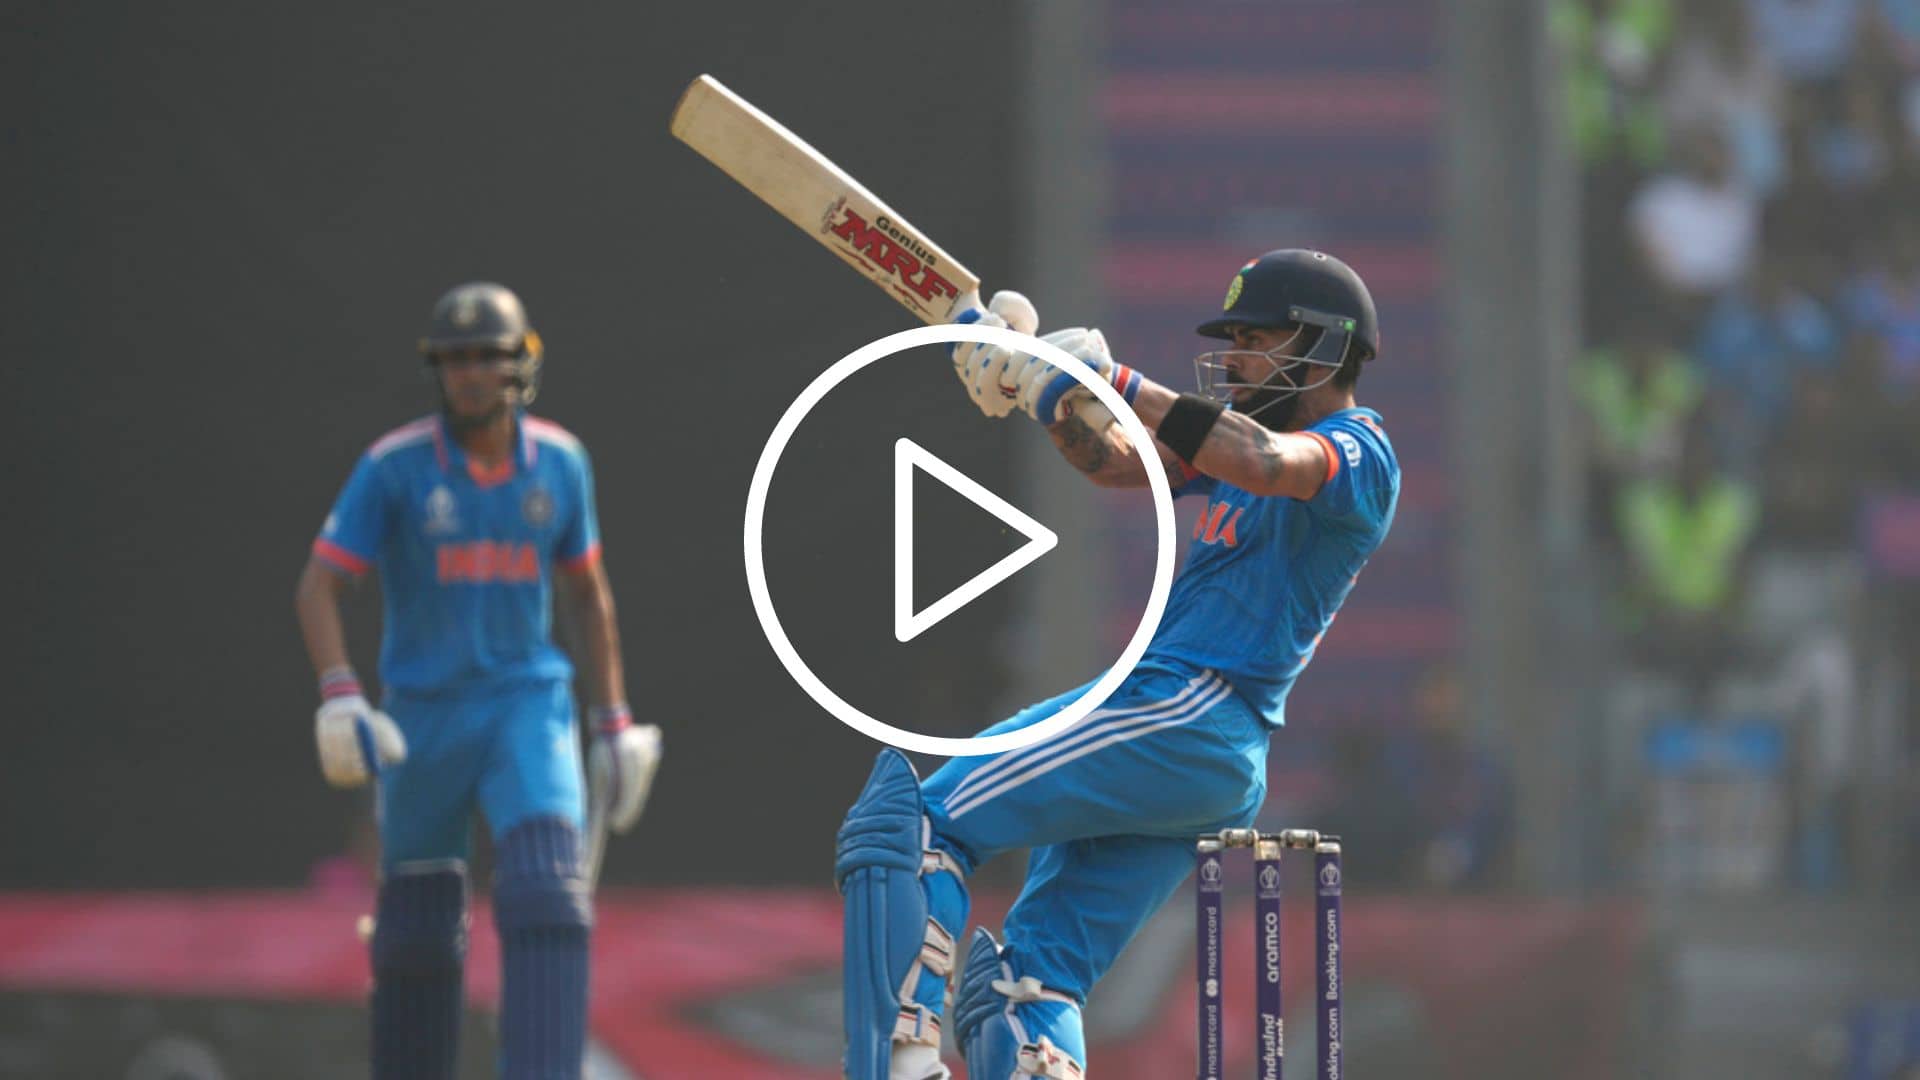 [Watch] Virat Kohli Smashes His 70th ODI Fifty Against SL After Rohit's Shocking Wicket